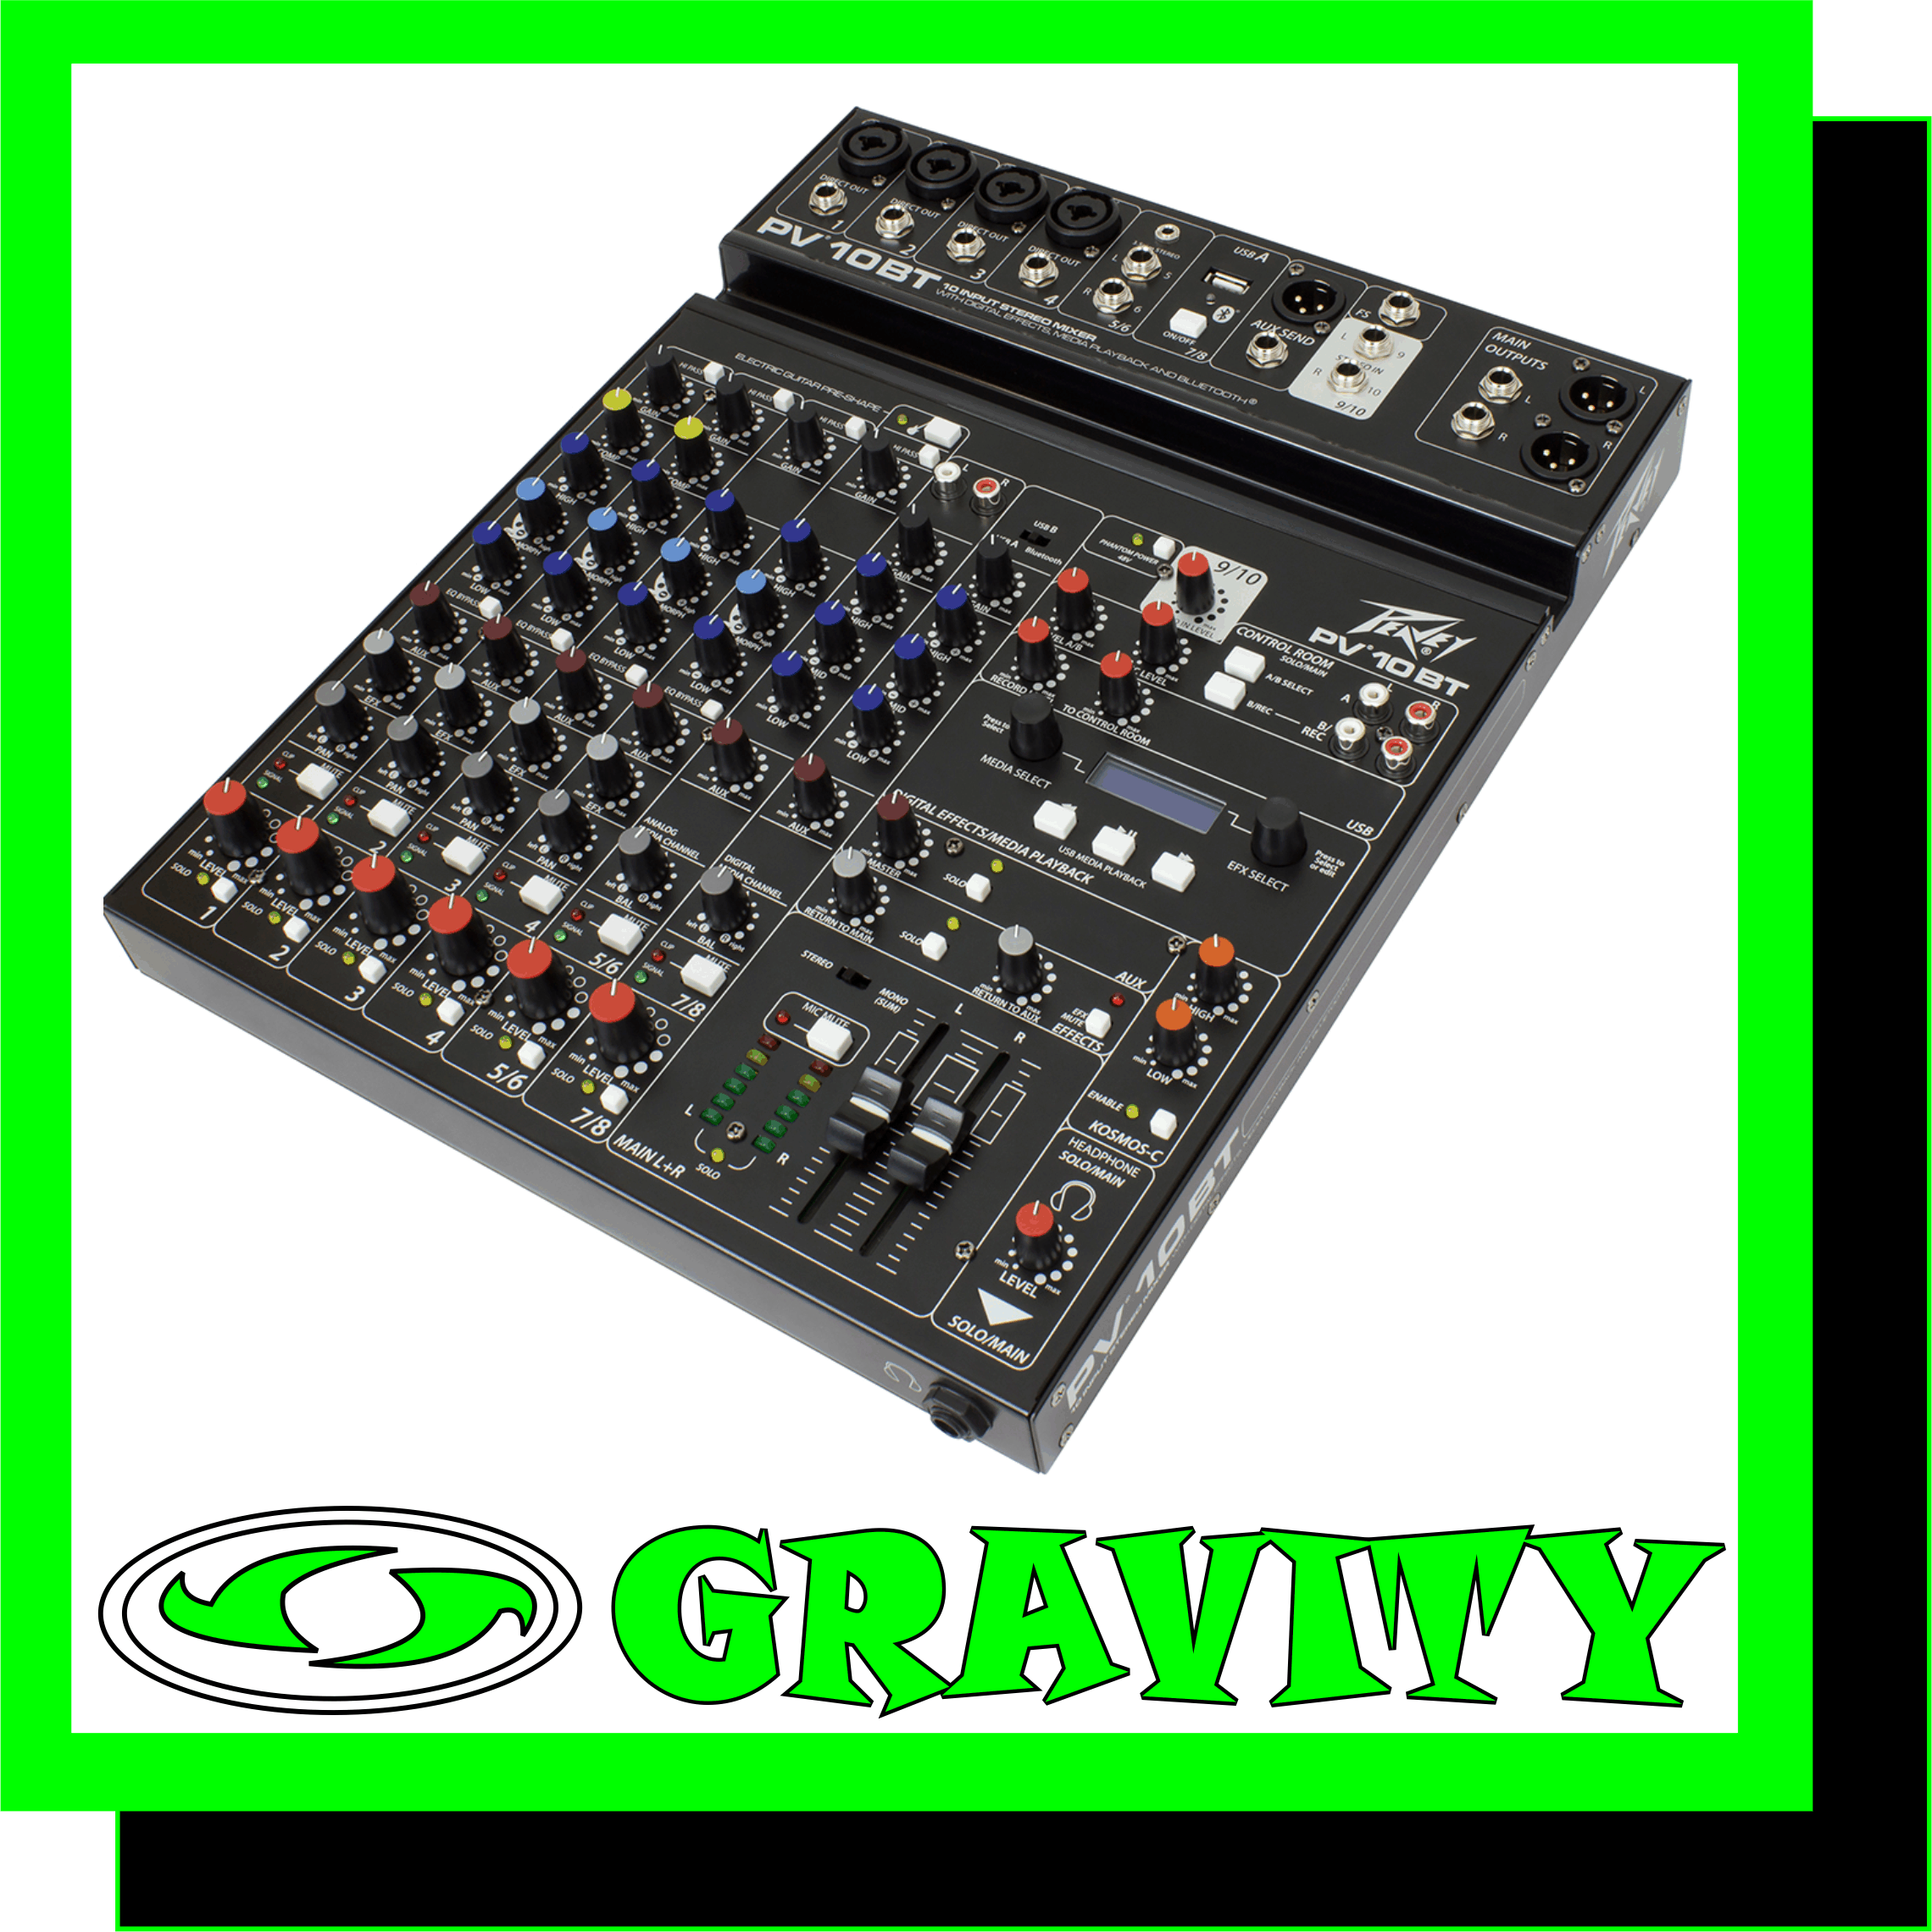 PV 10 AT  Features: -New rugged, slim, low-profile console design -Convenient tablet cradle -2 Channels of Antares® Auto-Tune -4 combination XLR/1/4" low noise mic preamps -Selectable Hi Pass Filter on first 4 inputs -3-band EQ on all channels -4 channels of Peavey's exclusive MidMorph® EQ -EQ bypass per channel -2 channels of built-in compression -Individual channel mutes -Individual Listen/Solo function -LED clip and signal present indication -4 Channels of direct out -Stereo pan control per channel -Channel 5/6 stereo 1/4", RCA, or 3.5mm input channel -Dual selectable control room outputs -One pre-fader AUX send -KOSMOS® bass and treble enhancement -Main stereo outputs with 1/4" unbalanced and balanced XLR connectors -Precision 60 mm faders on master -High quality master LED meter bridge -Master mic mute -Studio quality headphone output -Equipped with Bluetooth wireless connectivity, Bluetooth 3.0 + EDR, A2DP -On-board USB-A MP3 and WAV playback -Stereo USB-B streaming audio in and out, 16-bit, up to 48kHz sample rates -Built-in Digital Effects with LCD Display -Peavey's exclusive on-board Hi Z guitar input -Global 48V phantom power -Product Dimensions: 12.75" wide x 15.1" deep x 2.1875" high (32.39 cm x 38.35 cm x 5.56 cm) -Weight Packed: 9.48 lb(4.3 kg) -Width Packed: 16.14"(40.9956 cm) -Height Packed: 16.54"(42.0116 cm) -Depth Packed: 3.54"(8.9916 cm)  Overview: The all-new PV® 10 AT mixers come equipped with Antares® Auto-Tune® pitch correction, a technology that can literally help anyone sing in key and is used on professional recordings and live performances throughout the world. This technology is incorporated directly into a complete and powerful portable mixing solution, ensuring that your audience will experience perfectly tuned vocals to complement the crystal-clear audio of the mixer.  Features such as Bluetooth® allow seamless connection to almost any "smart" device. Multiple direct outs per channel allow easy connection to most DAW interfaces for recording. In addition, these mixers can stream audio directly to a PC. MP3 playback is also available via USB A port and LCD display.  With a slim, low-profile design, PV AT series mixers are ideal in small to mid-size venues. Key features include 2 channels of Antares Auto-Tune, 4 channels of reference-quality mic preamps, 4 direct outputs for recording, Bluetooth® wireless input, and built-in digital effects with LCD display. These all-new mixers will provide years of hassle-free operation.